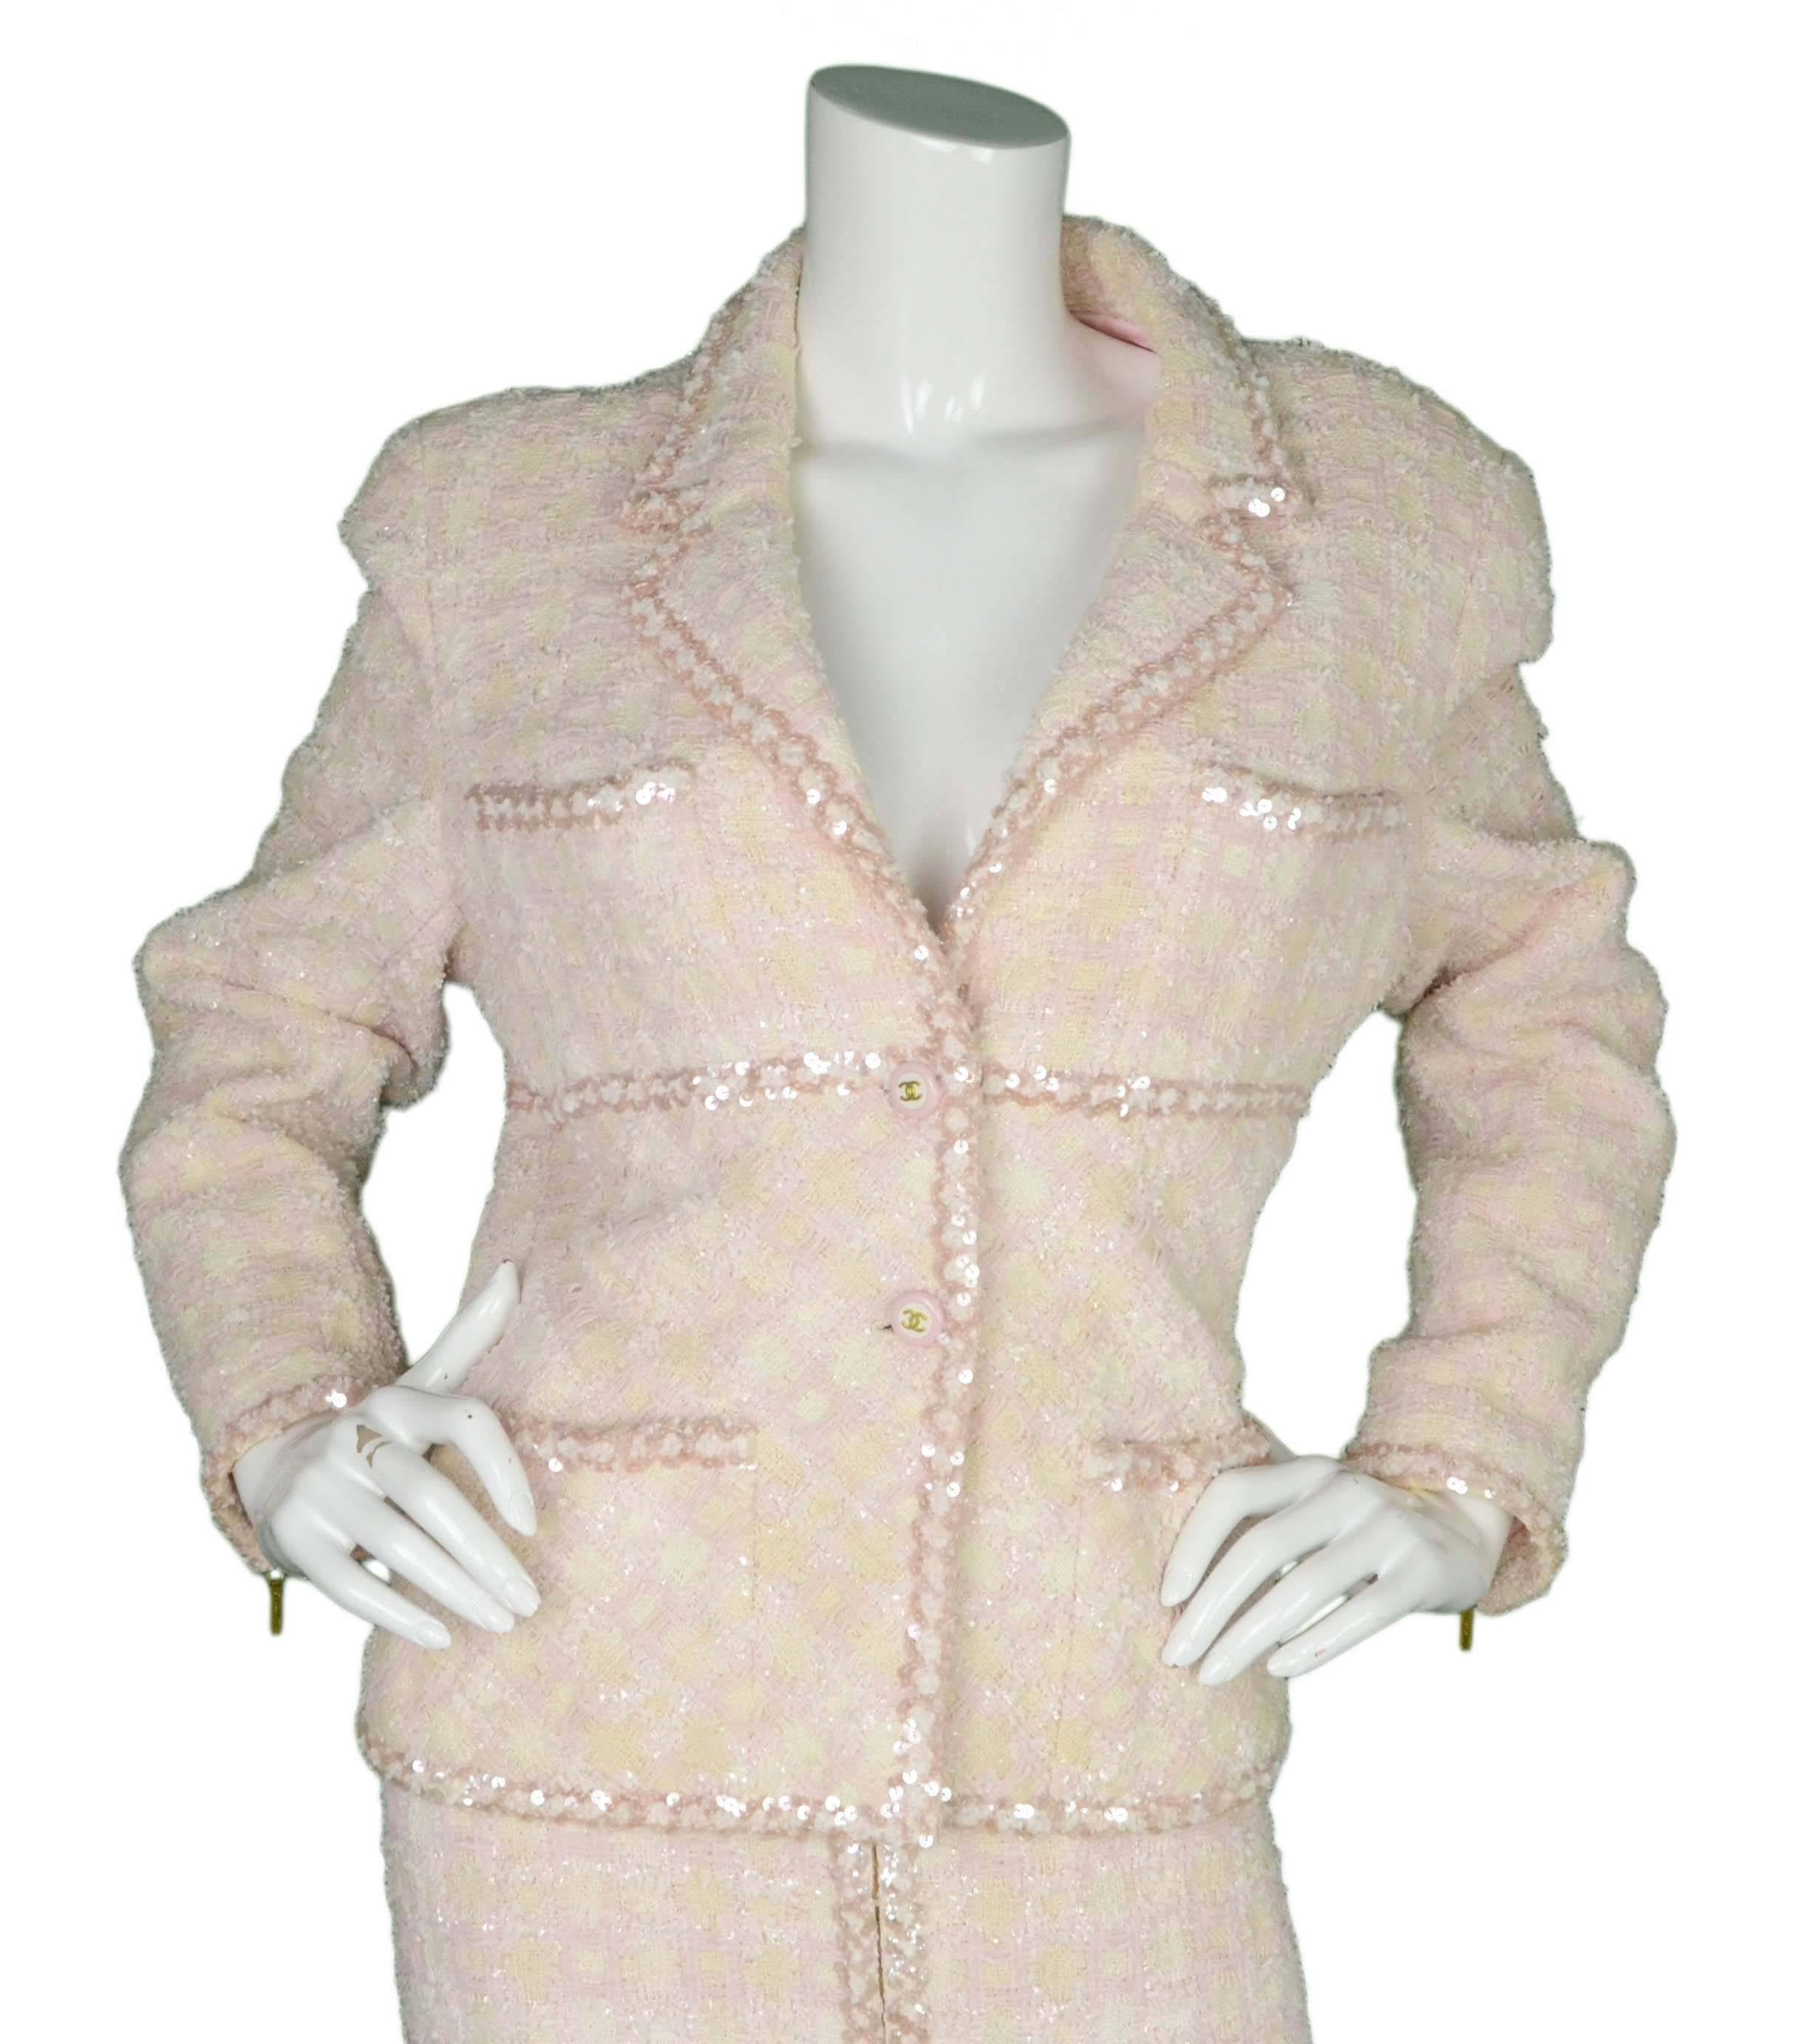 Chanel Vintage '95 Beige & Pink Tweed Skirt Suit 
Features pink sequin details throughout
Made In: France
Year of Production: 1995
Color: Pink and beige
Composition: 65% cotton, 25% nylon, 10% rayon
Lining: Pink, 95% silk, 5%